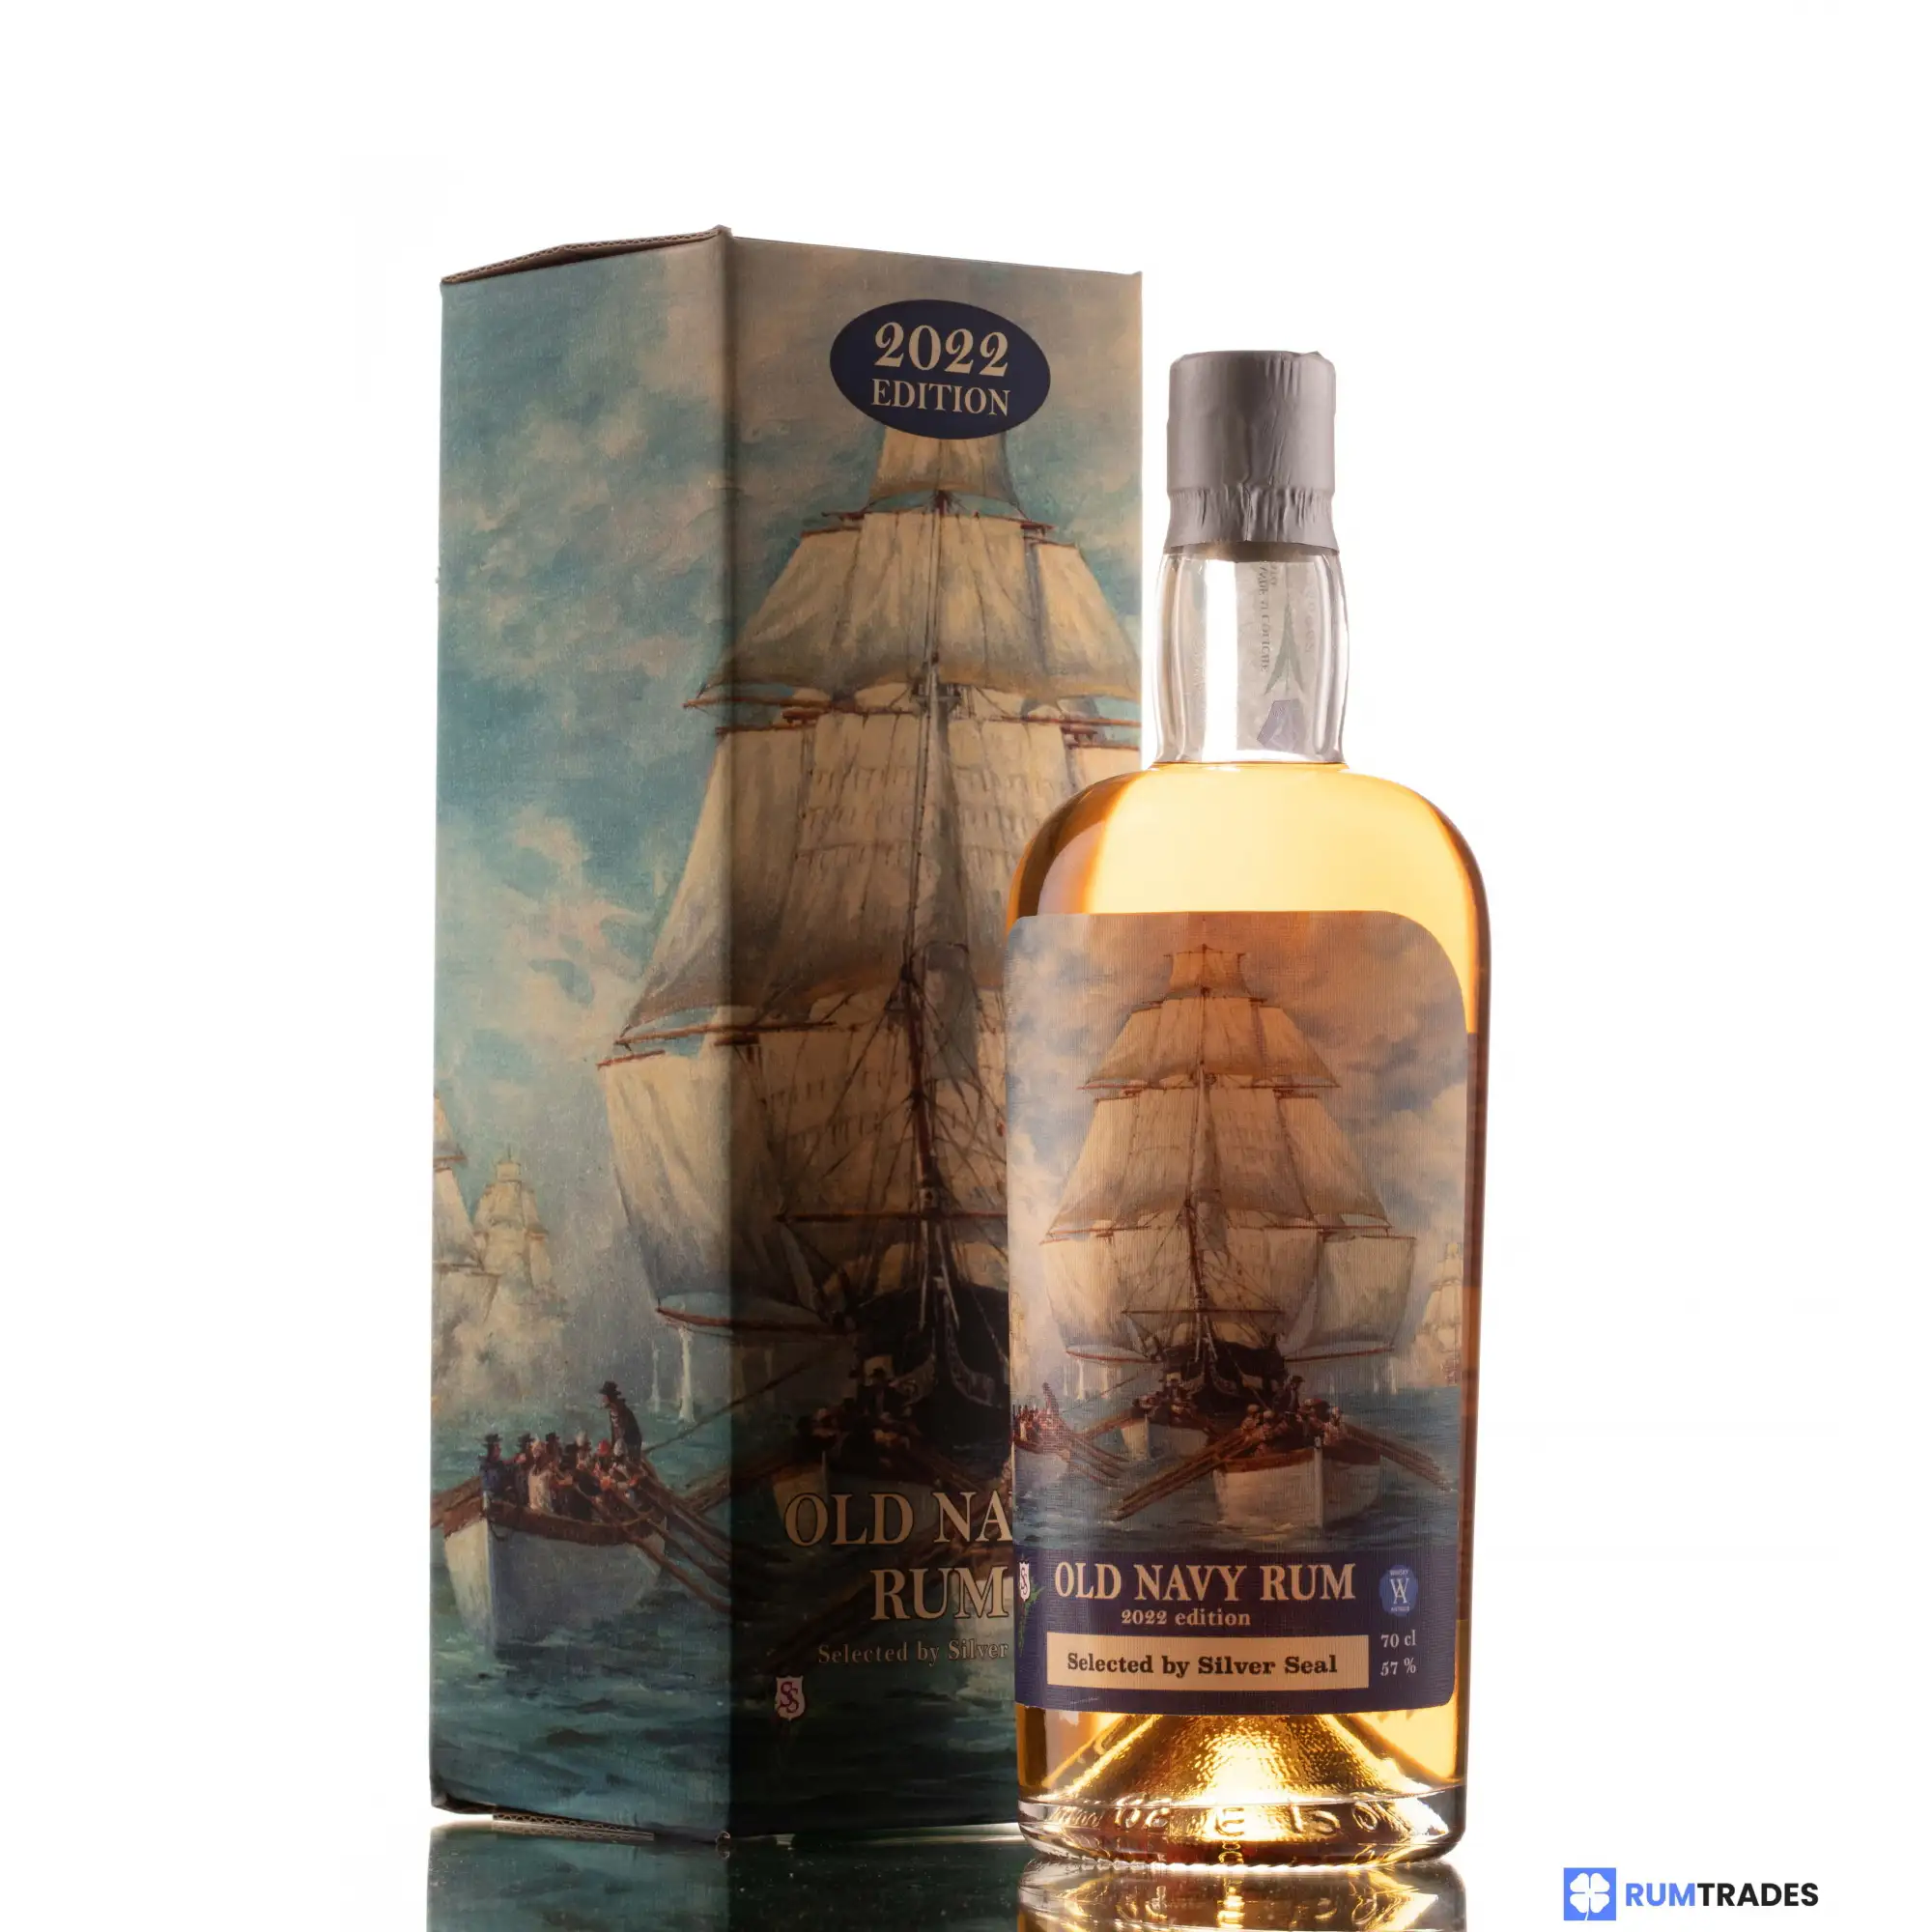 Image of the front of the bottle of the rum Old Navy Rum (Edition 2022)